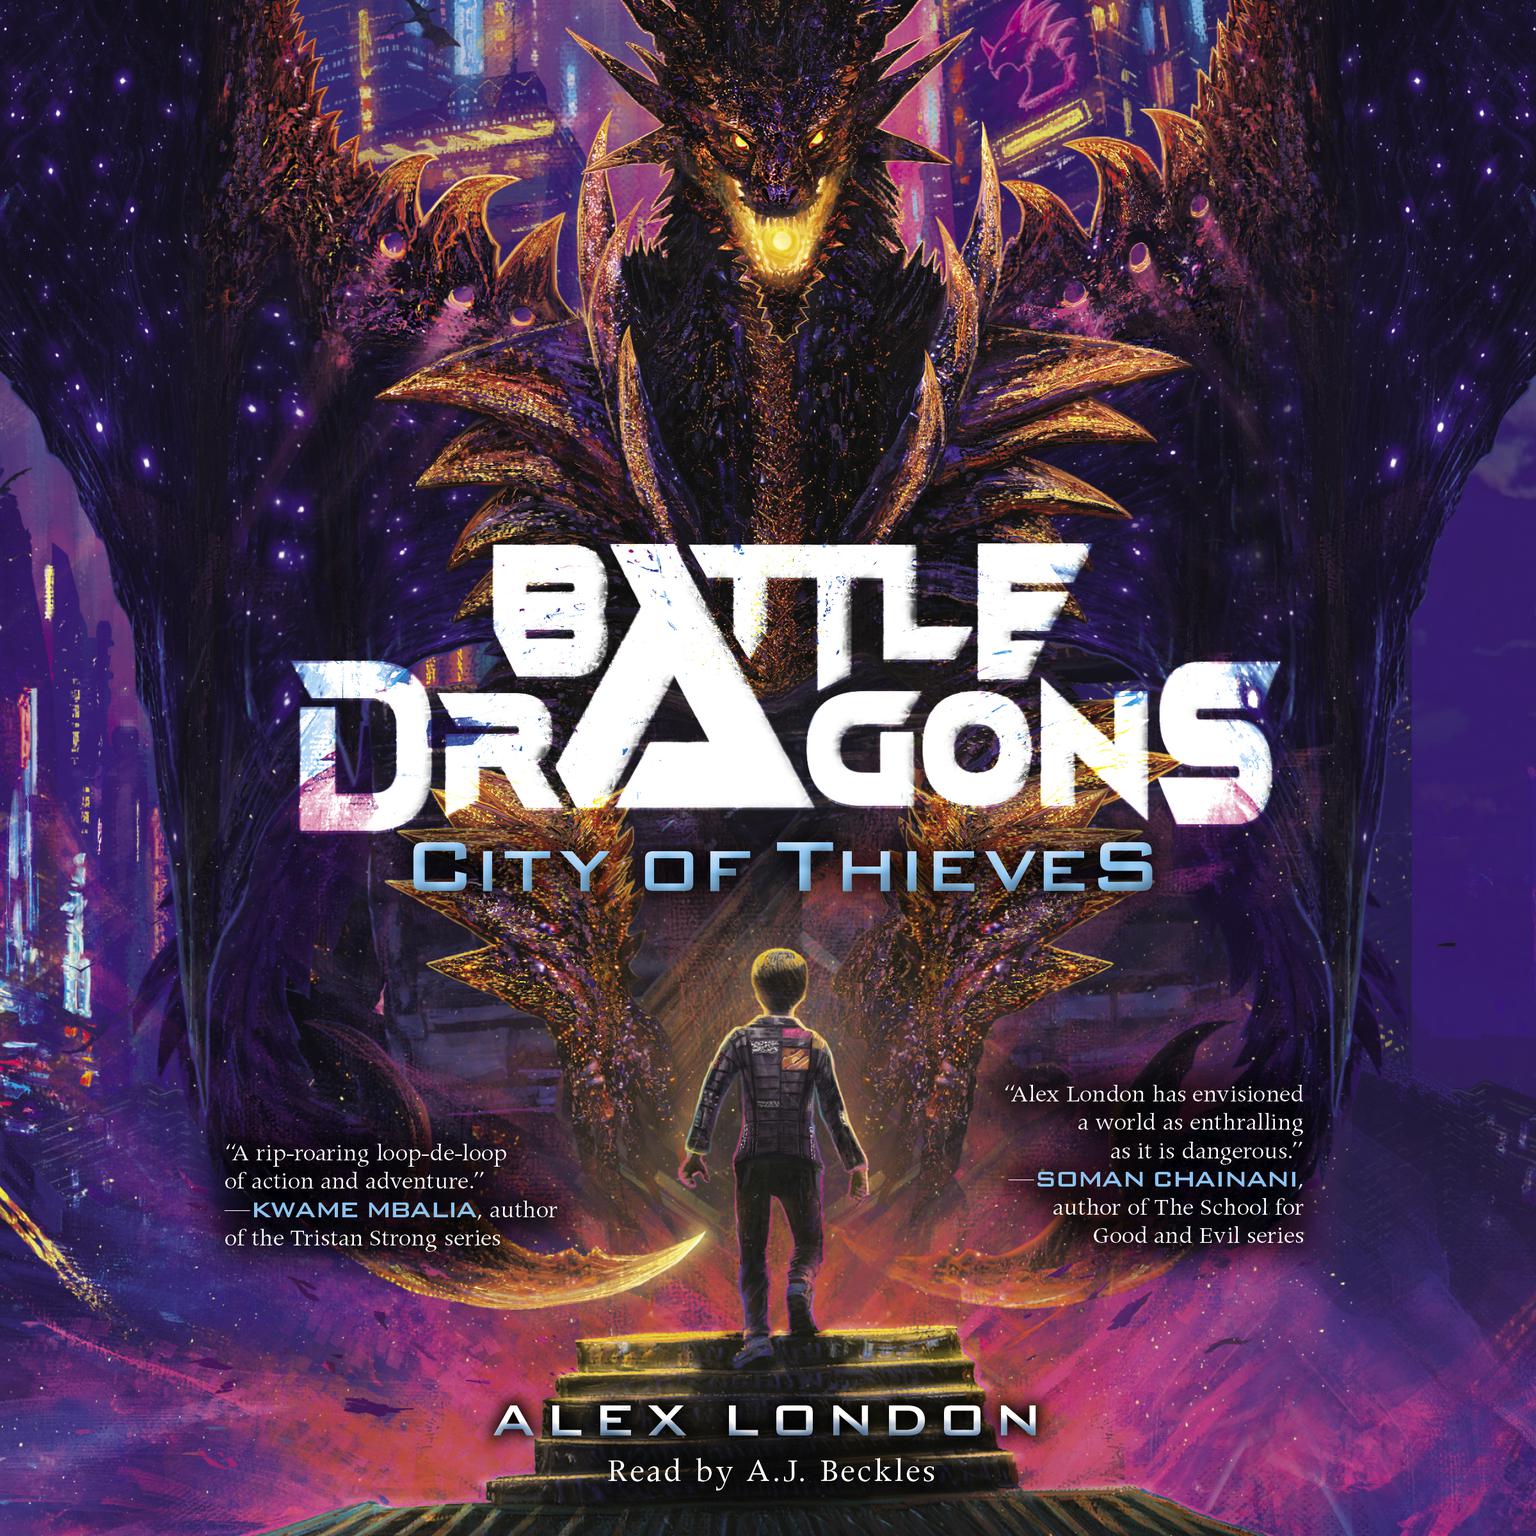 City of Thieves (Battle Dragons #1) Audiobook, by Alex London